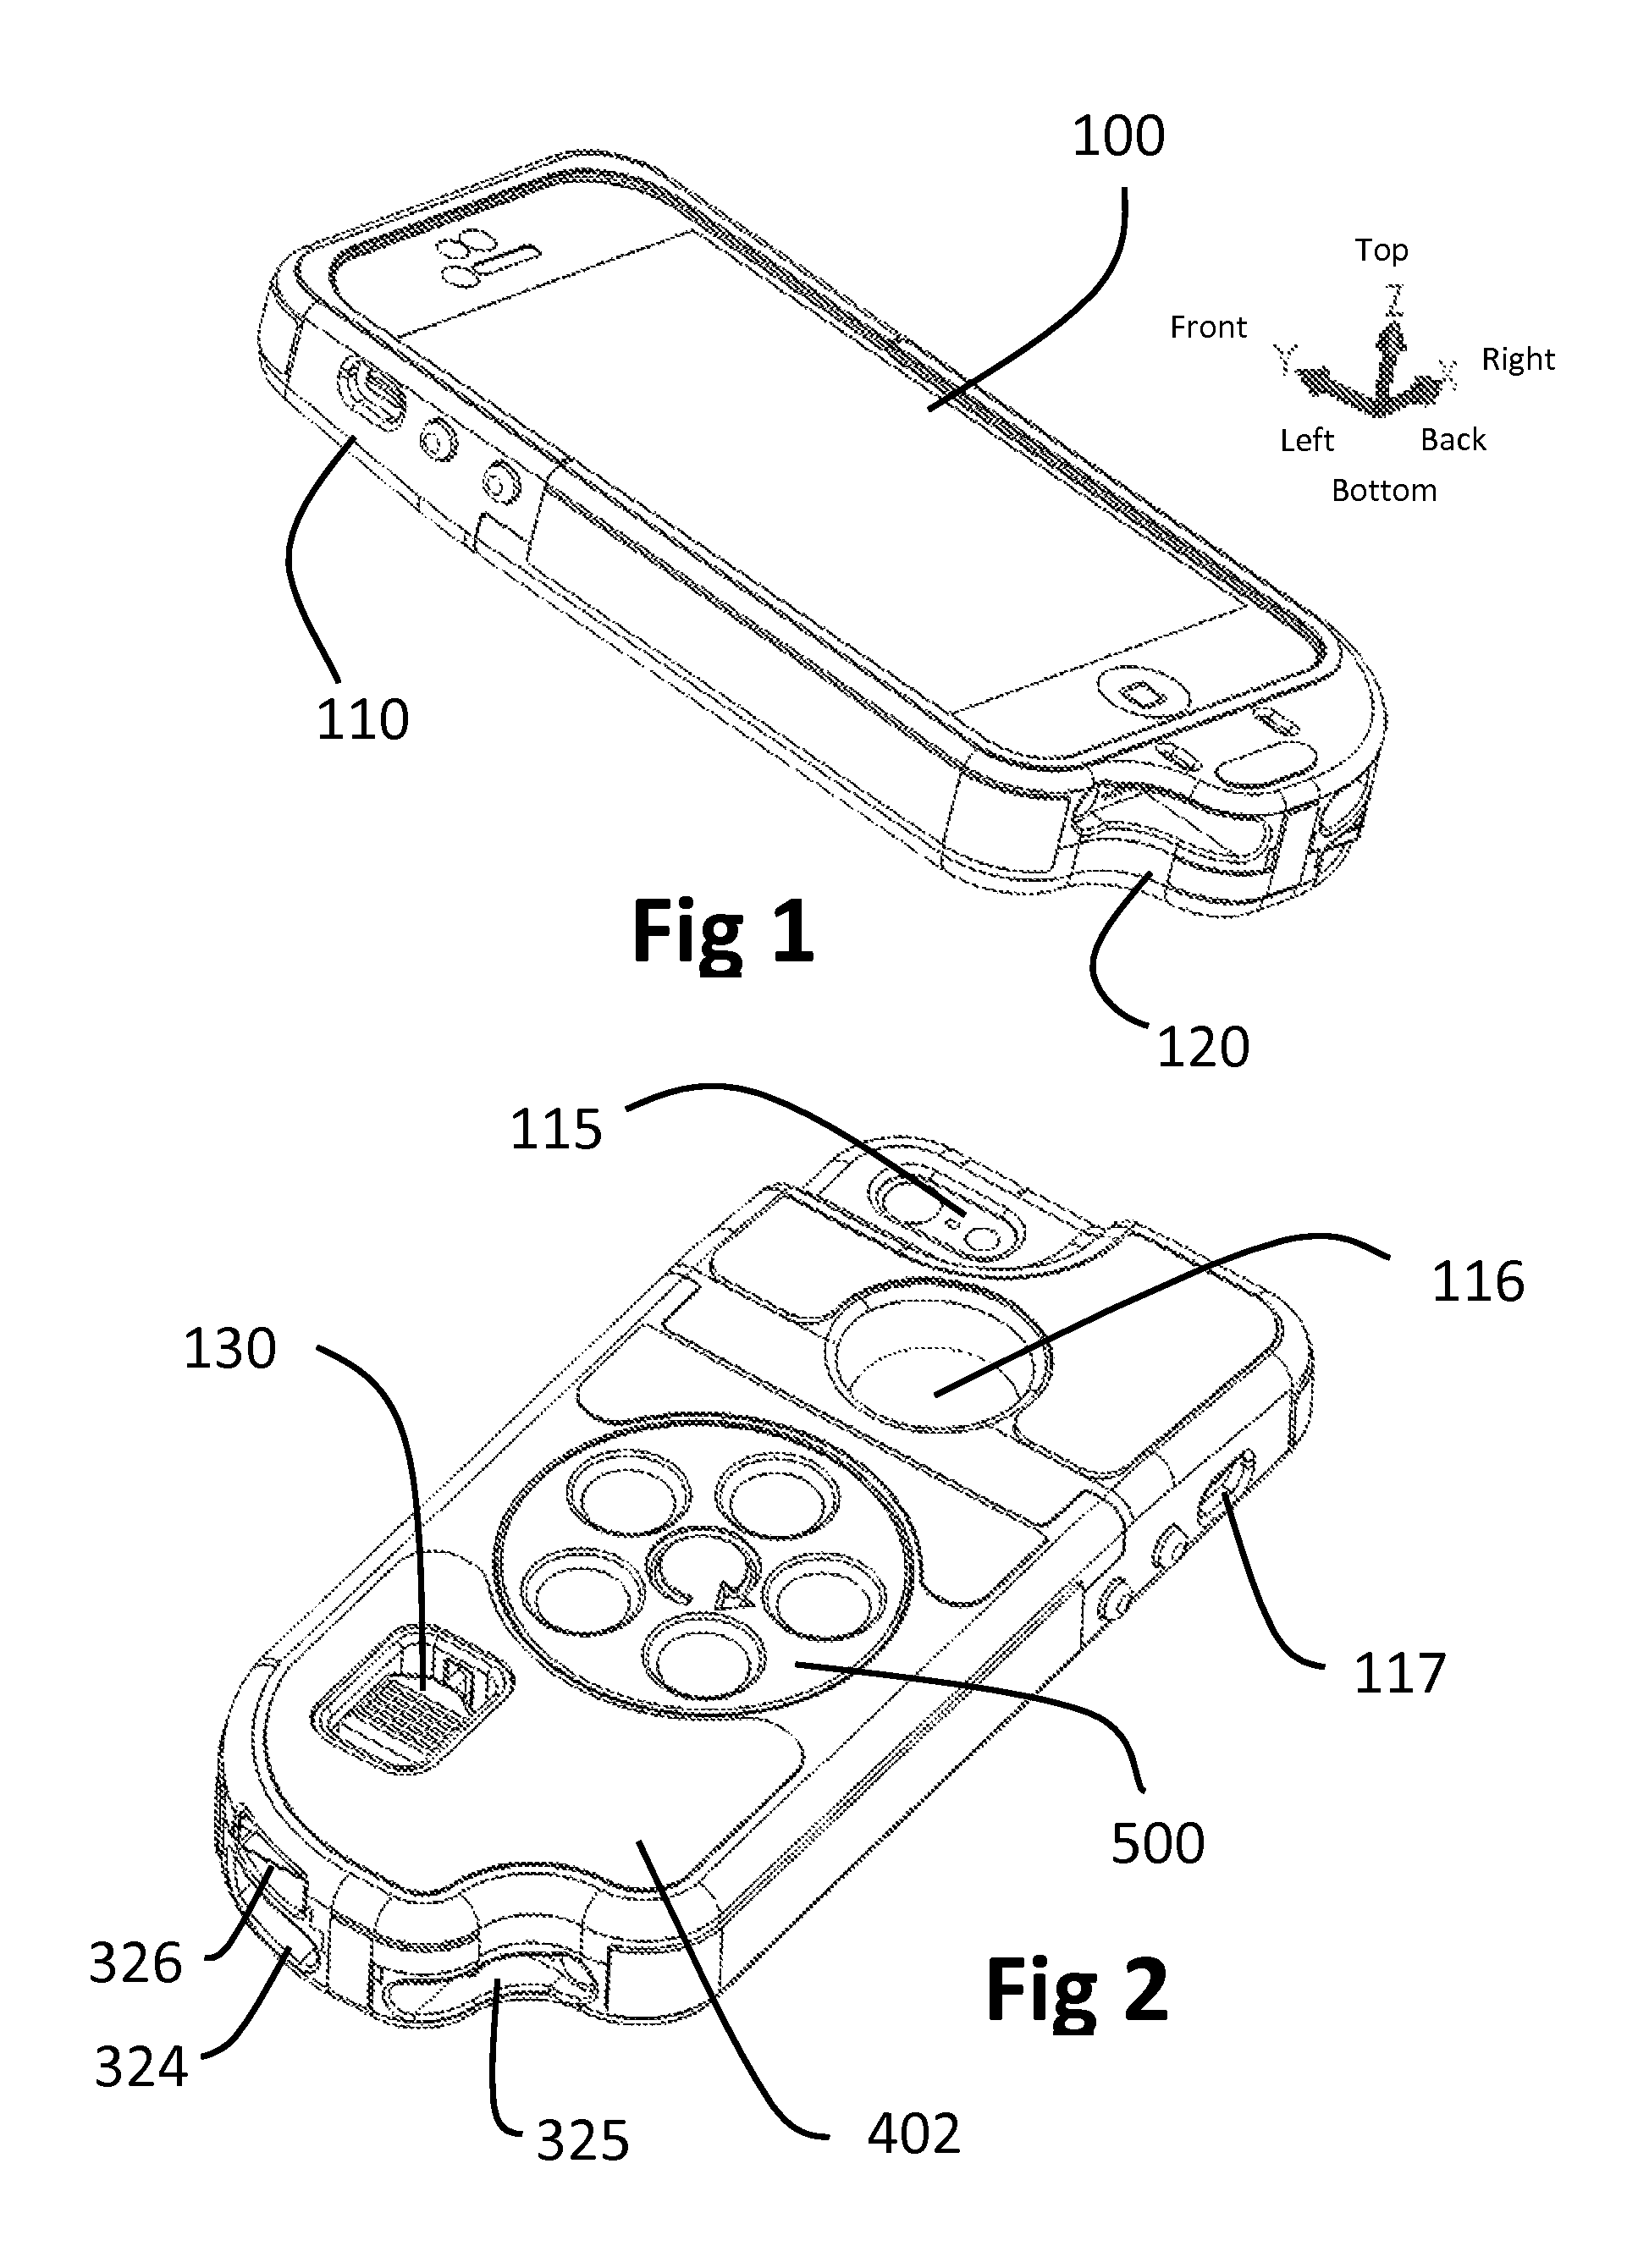 Protective case for portable electronic device with integrated dispensable and retractable charge and sync cable